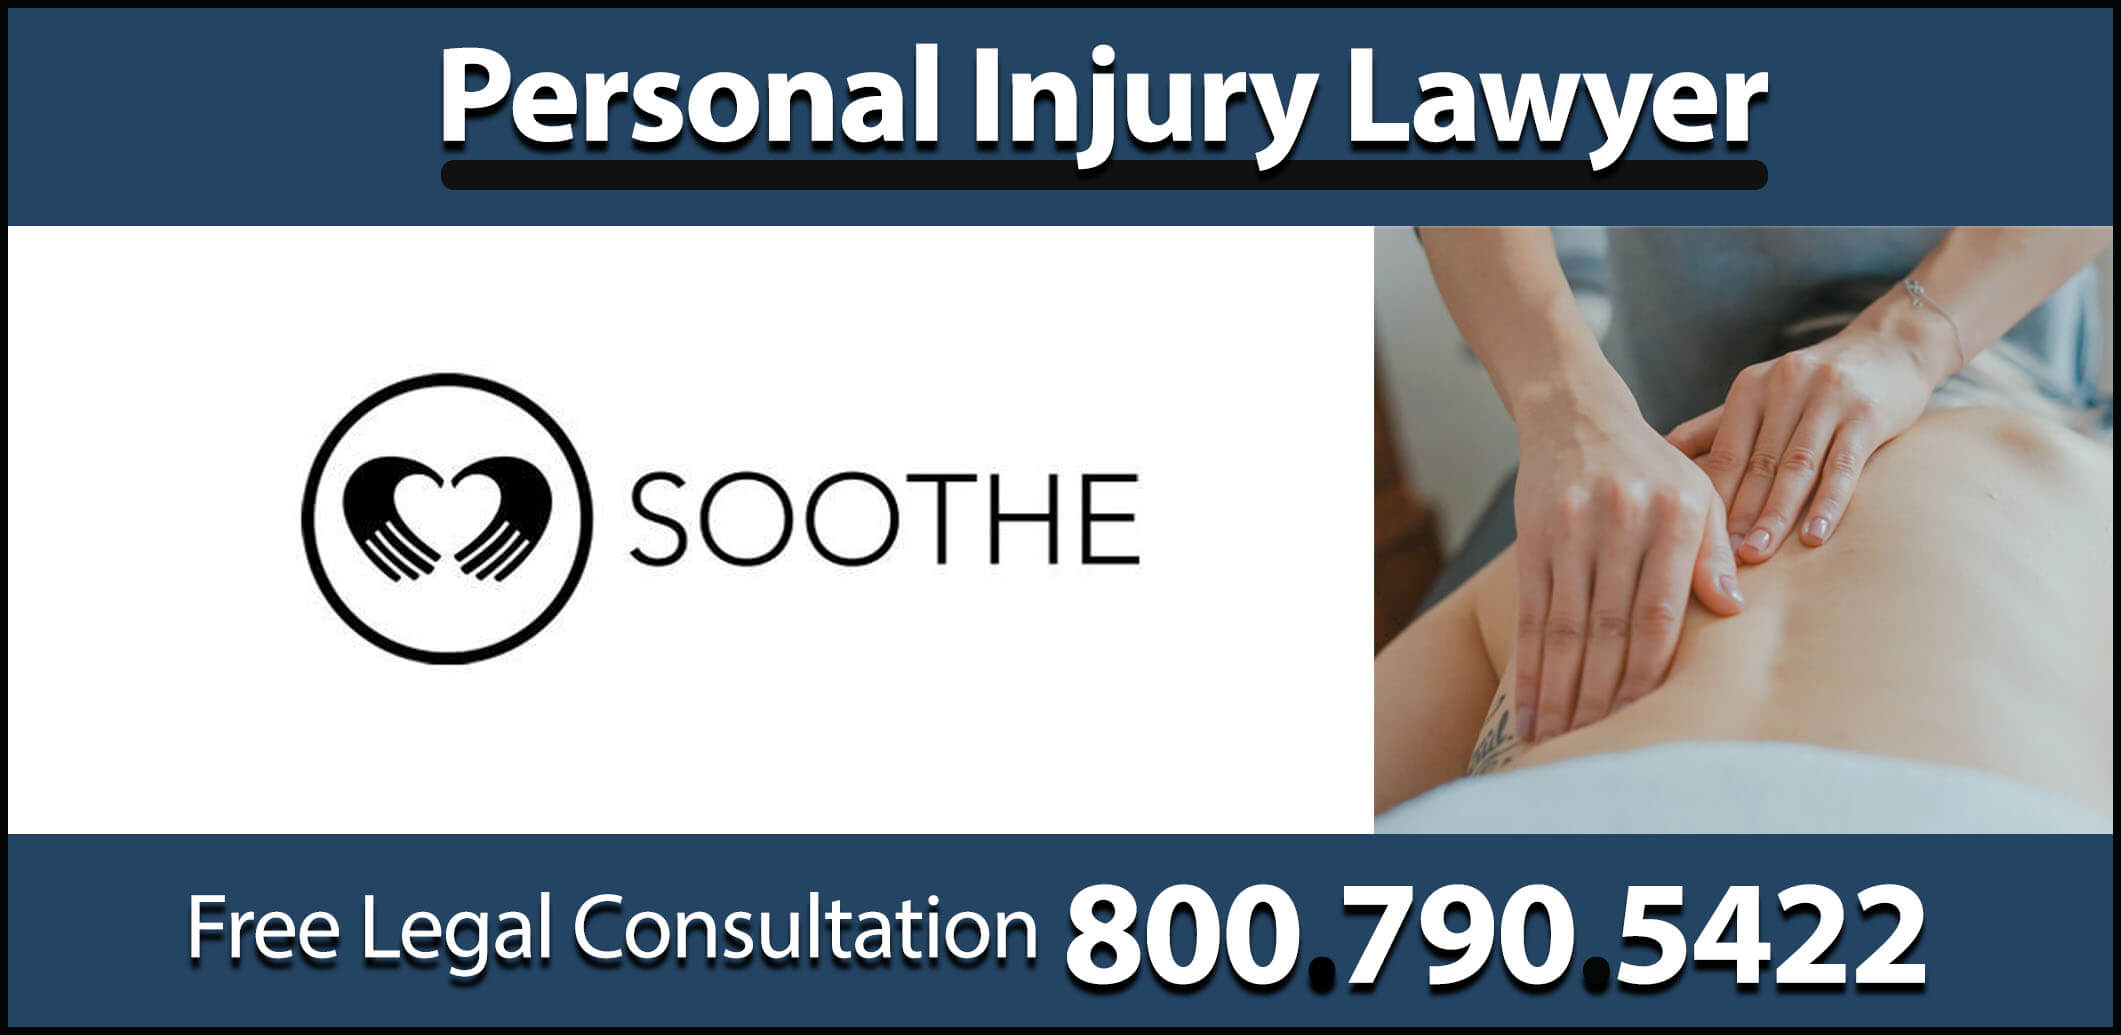 soothe personal injury allergic reactions theft robbery sexual assault sue lawyers attorney compensation